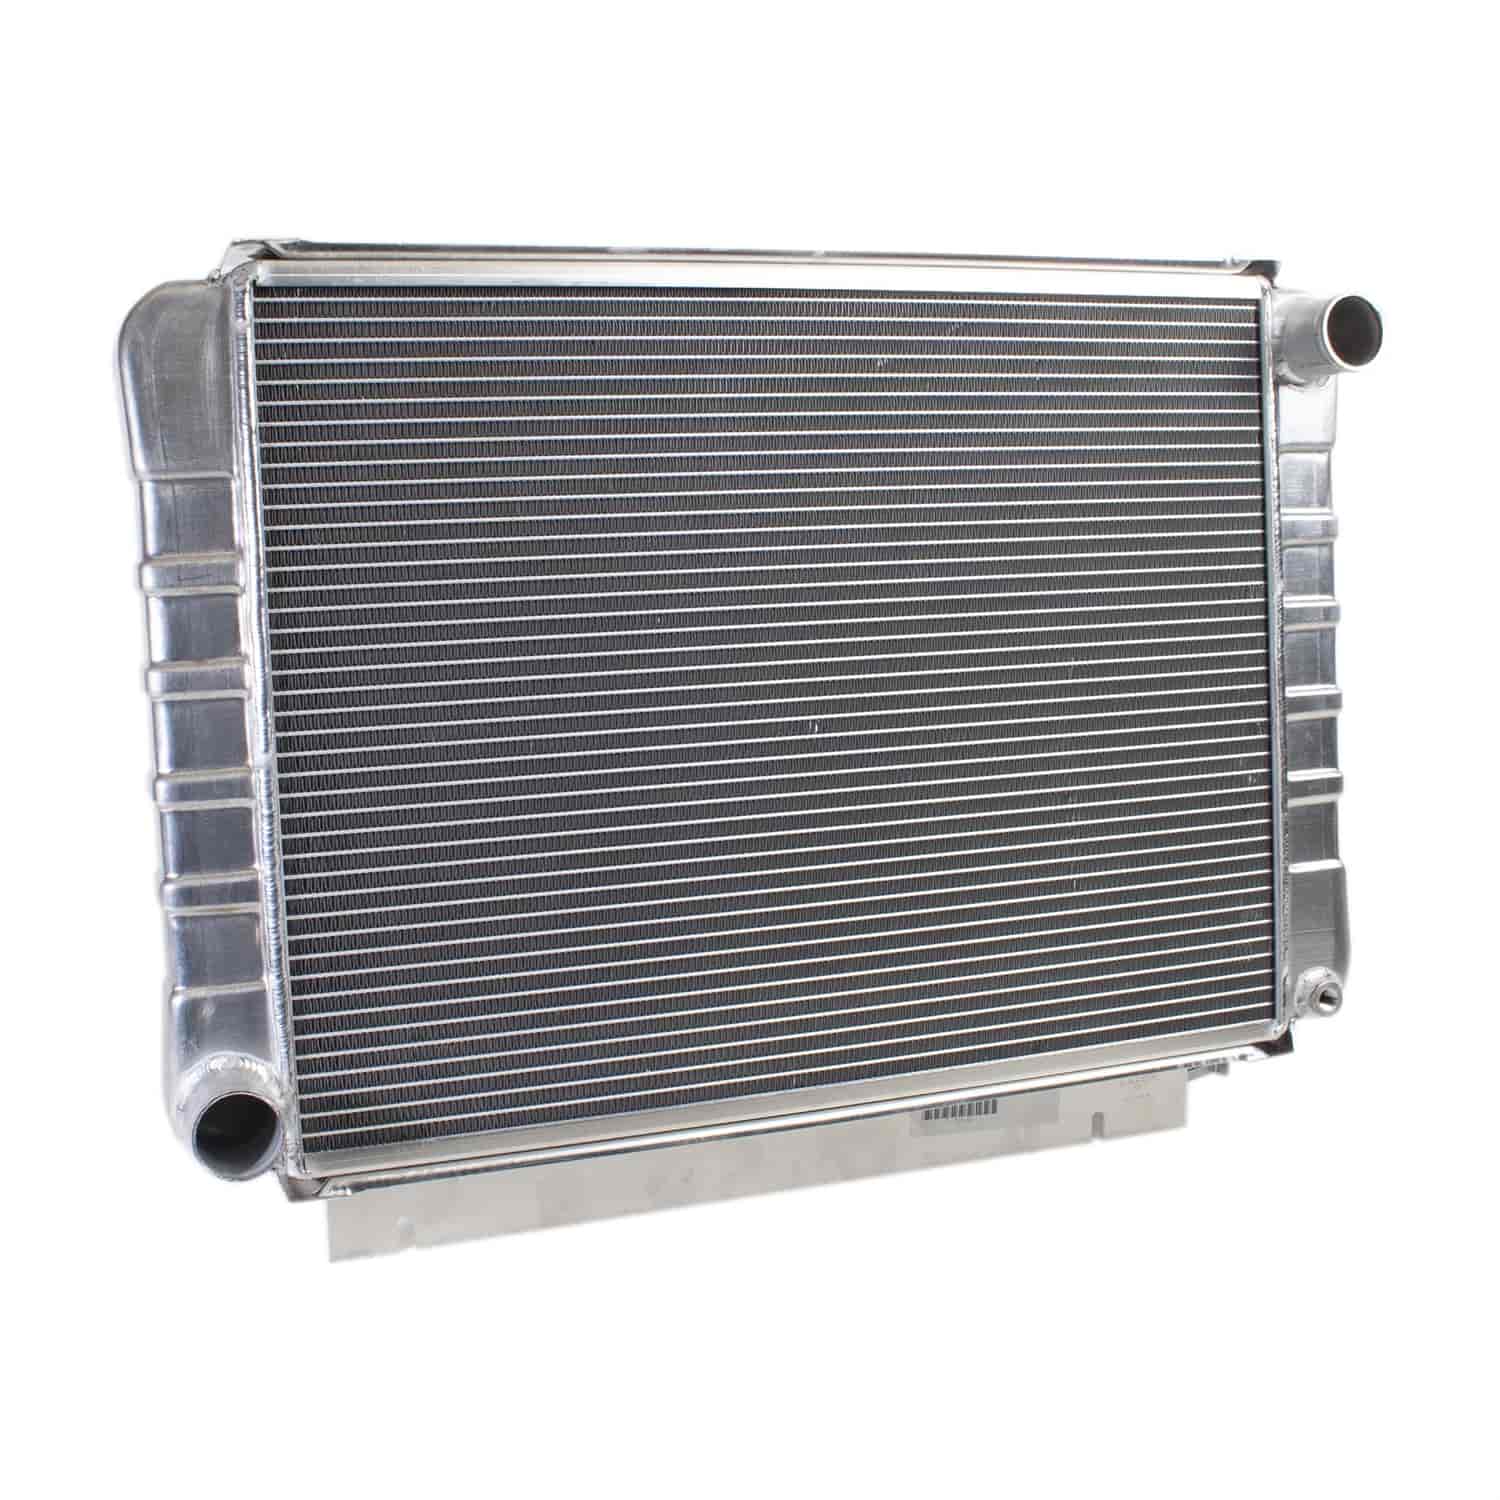 ExactFit Radiator for 1960-1963 Galaxie with Late Ford